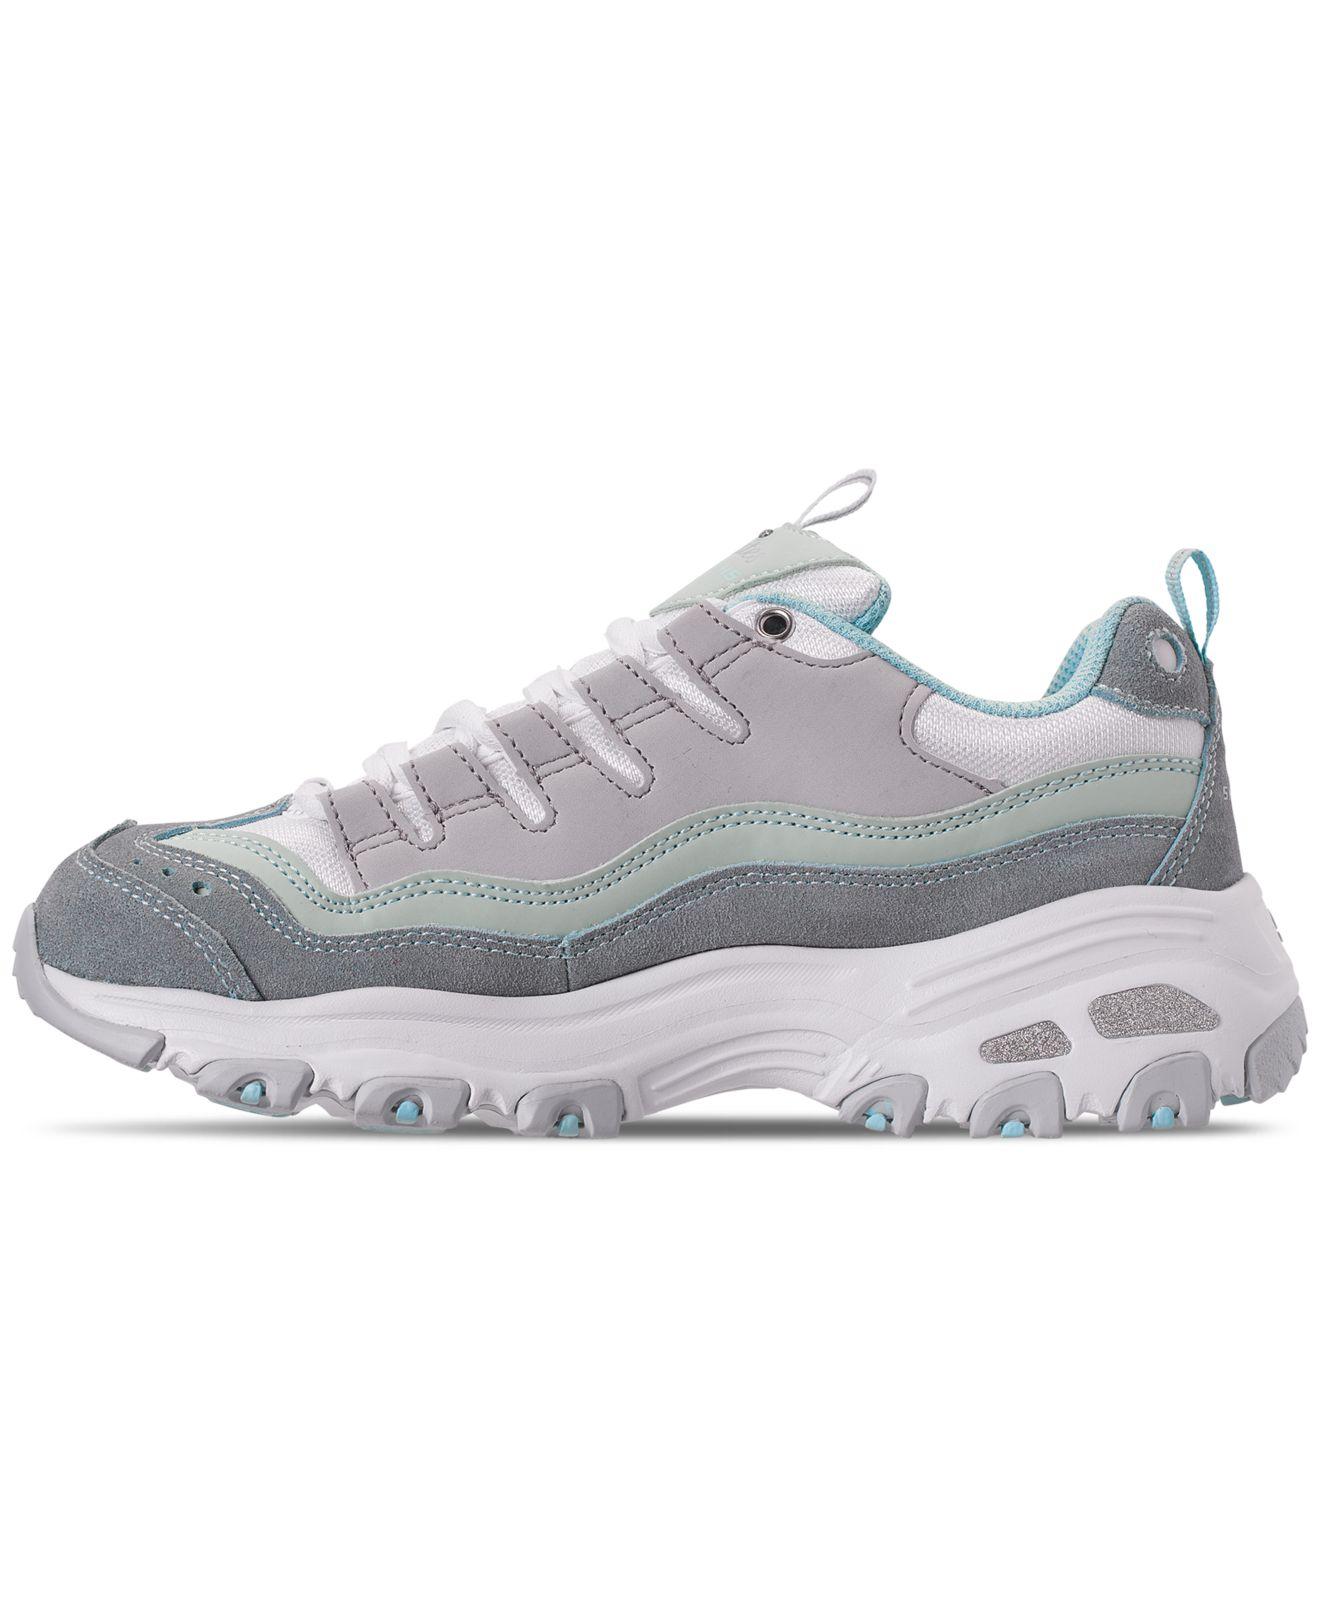 Skechers Leather D'lites - Sure Thing Walking Sneakers From Finish Line in  Light Blue/Grey (Gray) - Save 68% - Lyst